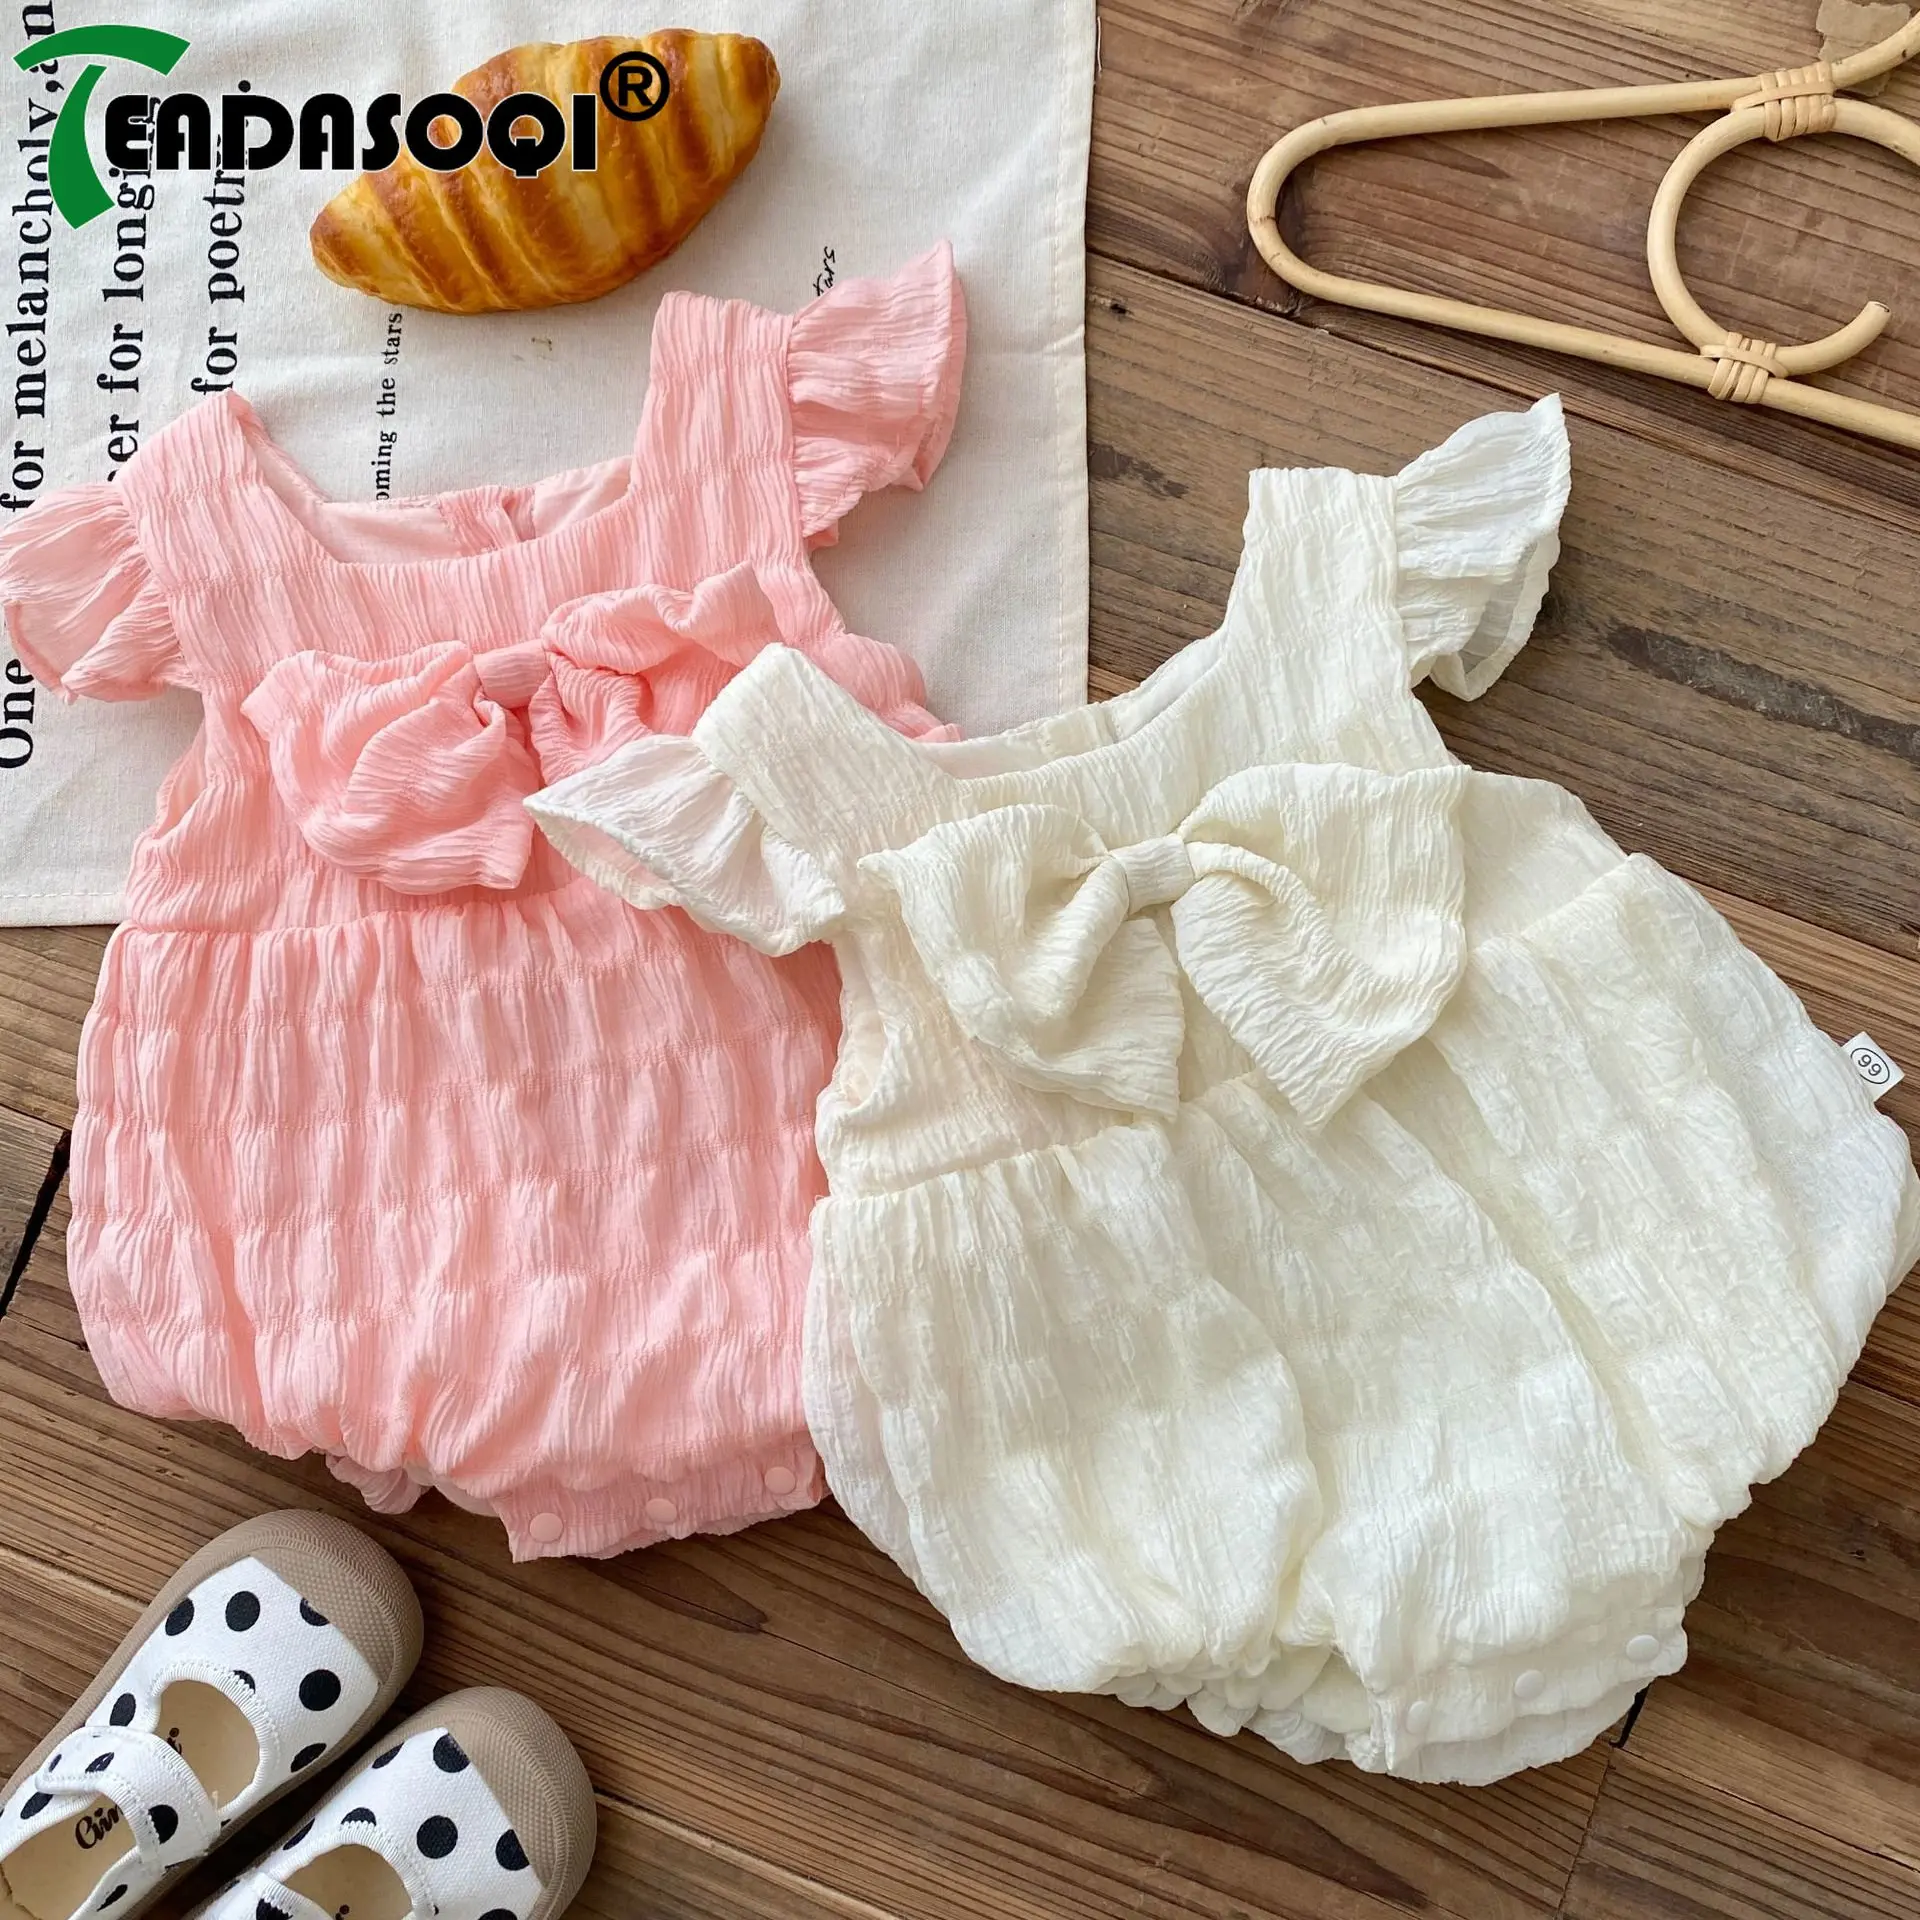 

Summer New In One-pieces Bodysuits 유아복 Newborn Baby Girls Fly Sleeve Bow Bud Cotton Outwear Infant Kids Princess Cute Clothing